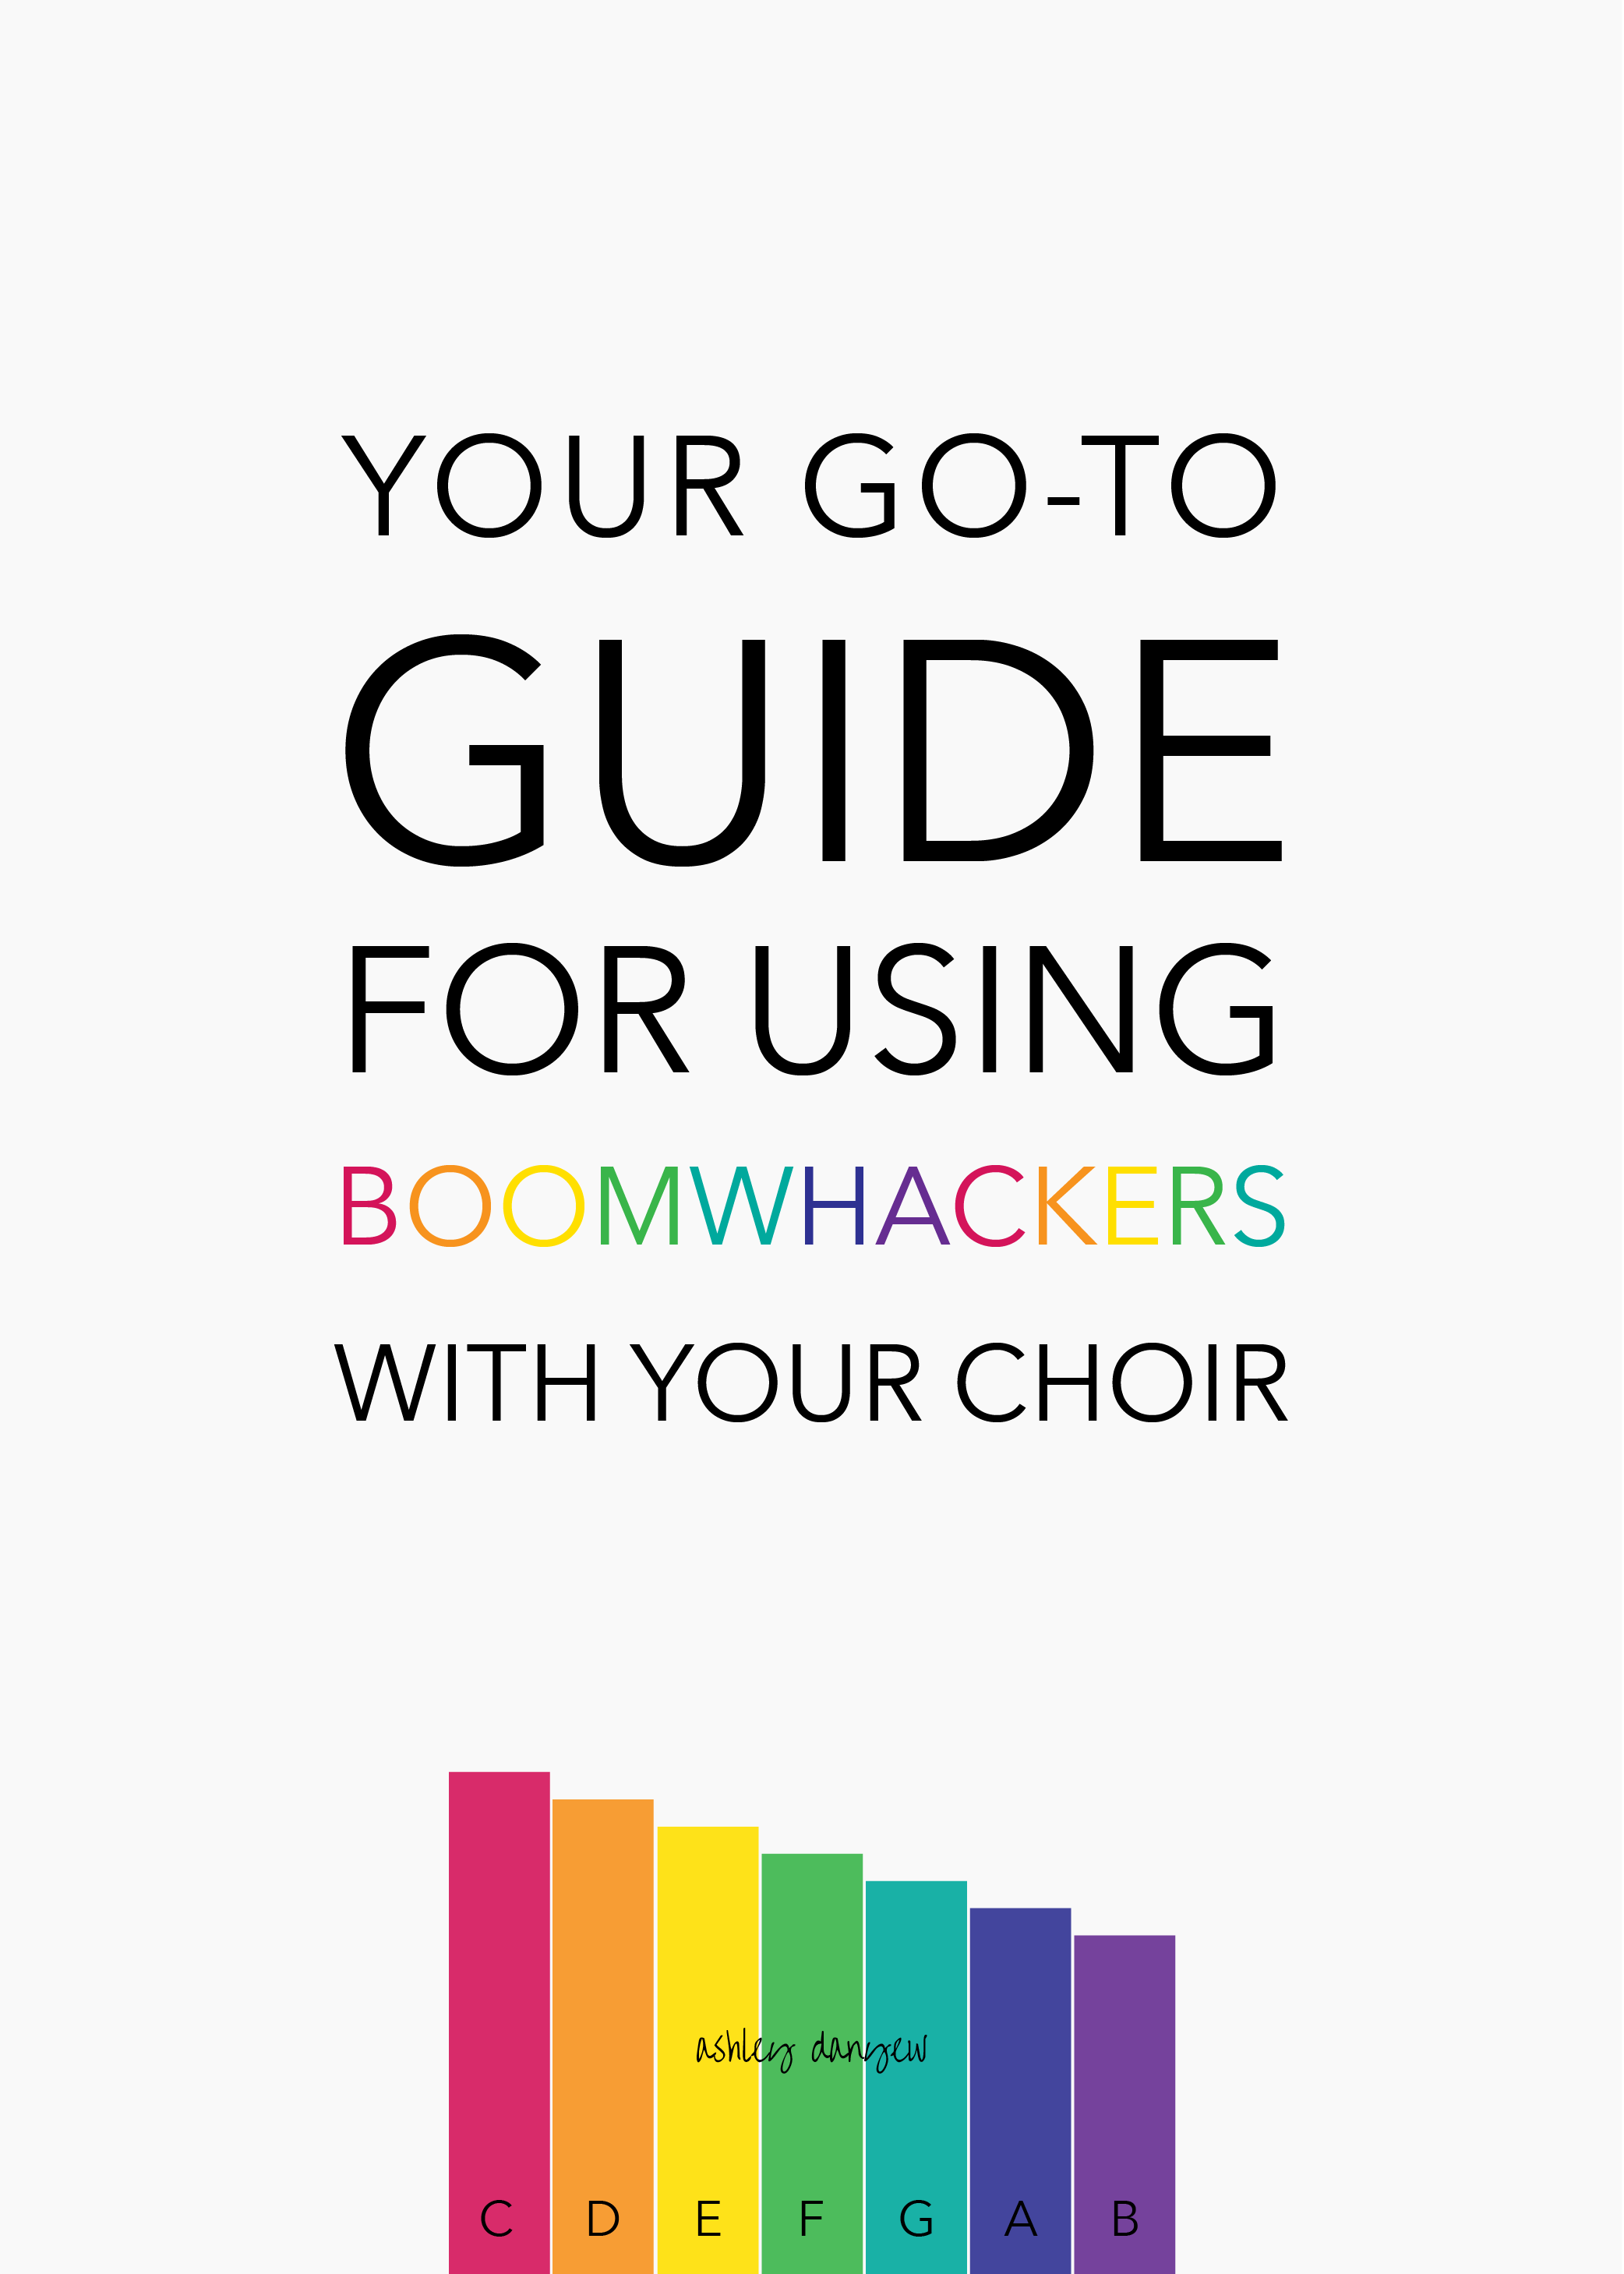 Your Go-To Guide for Using Boomwhackers With Your Choir